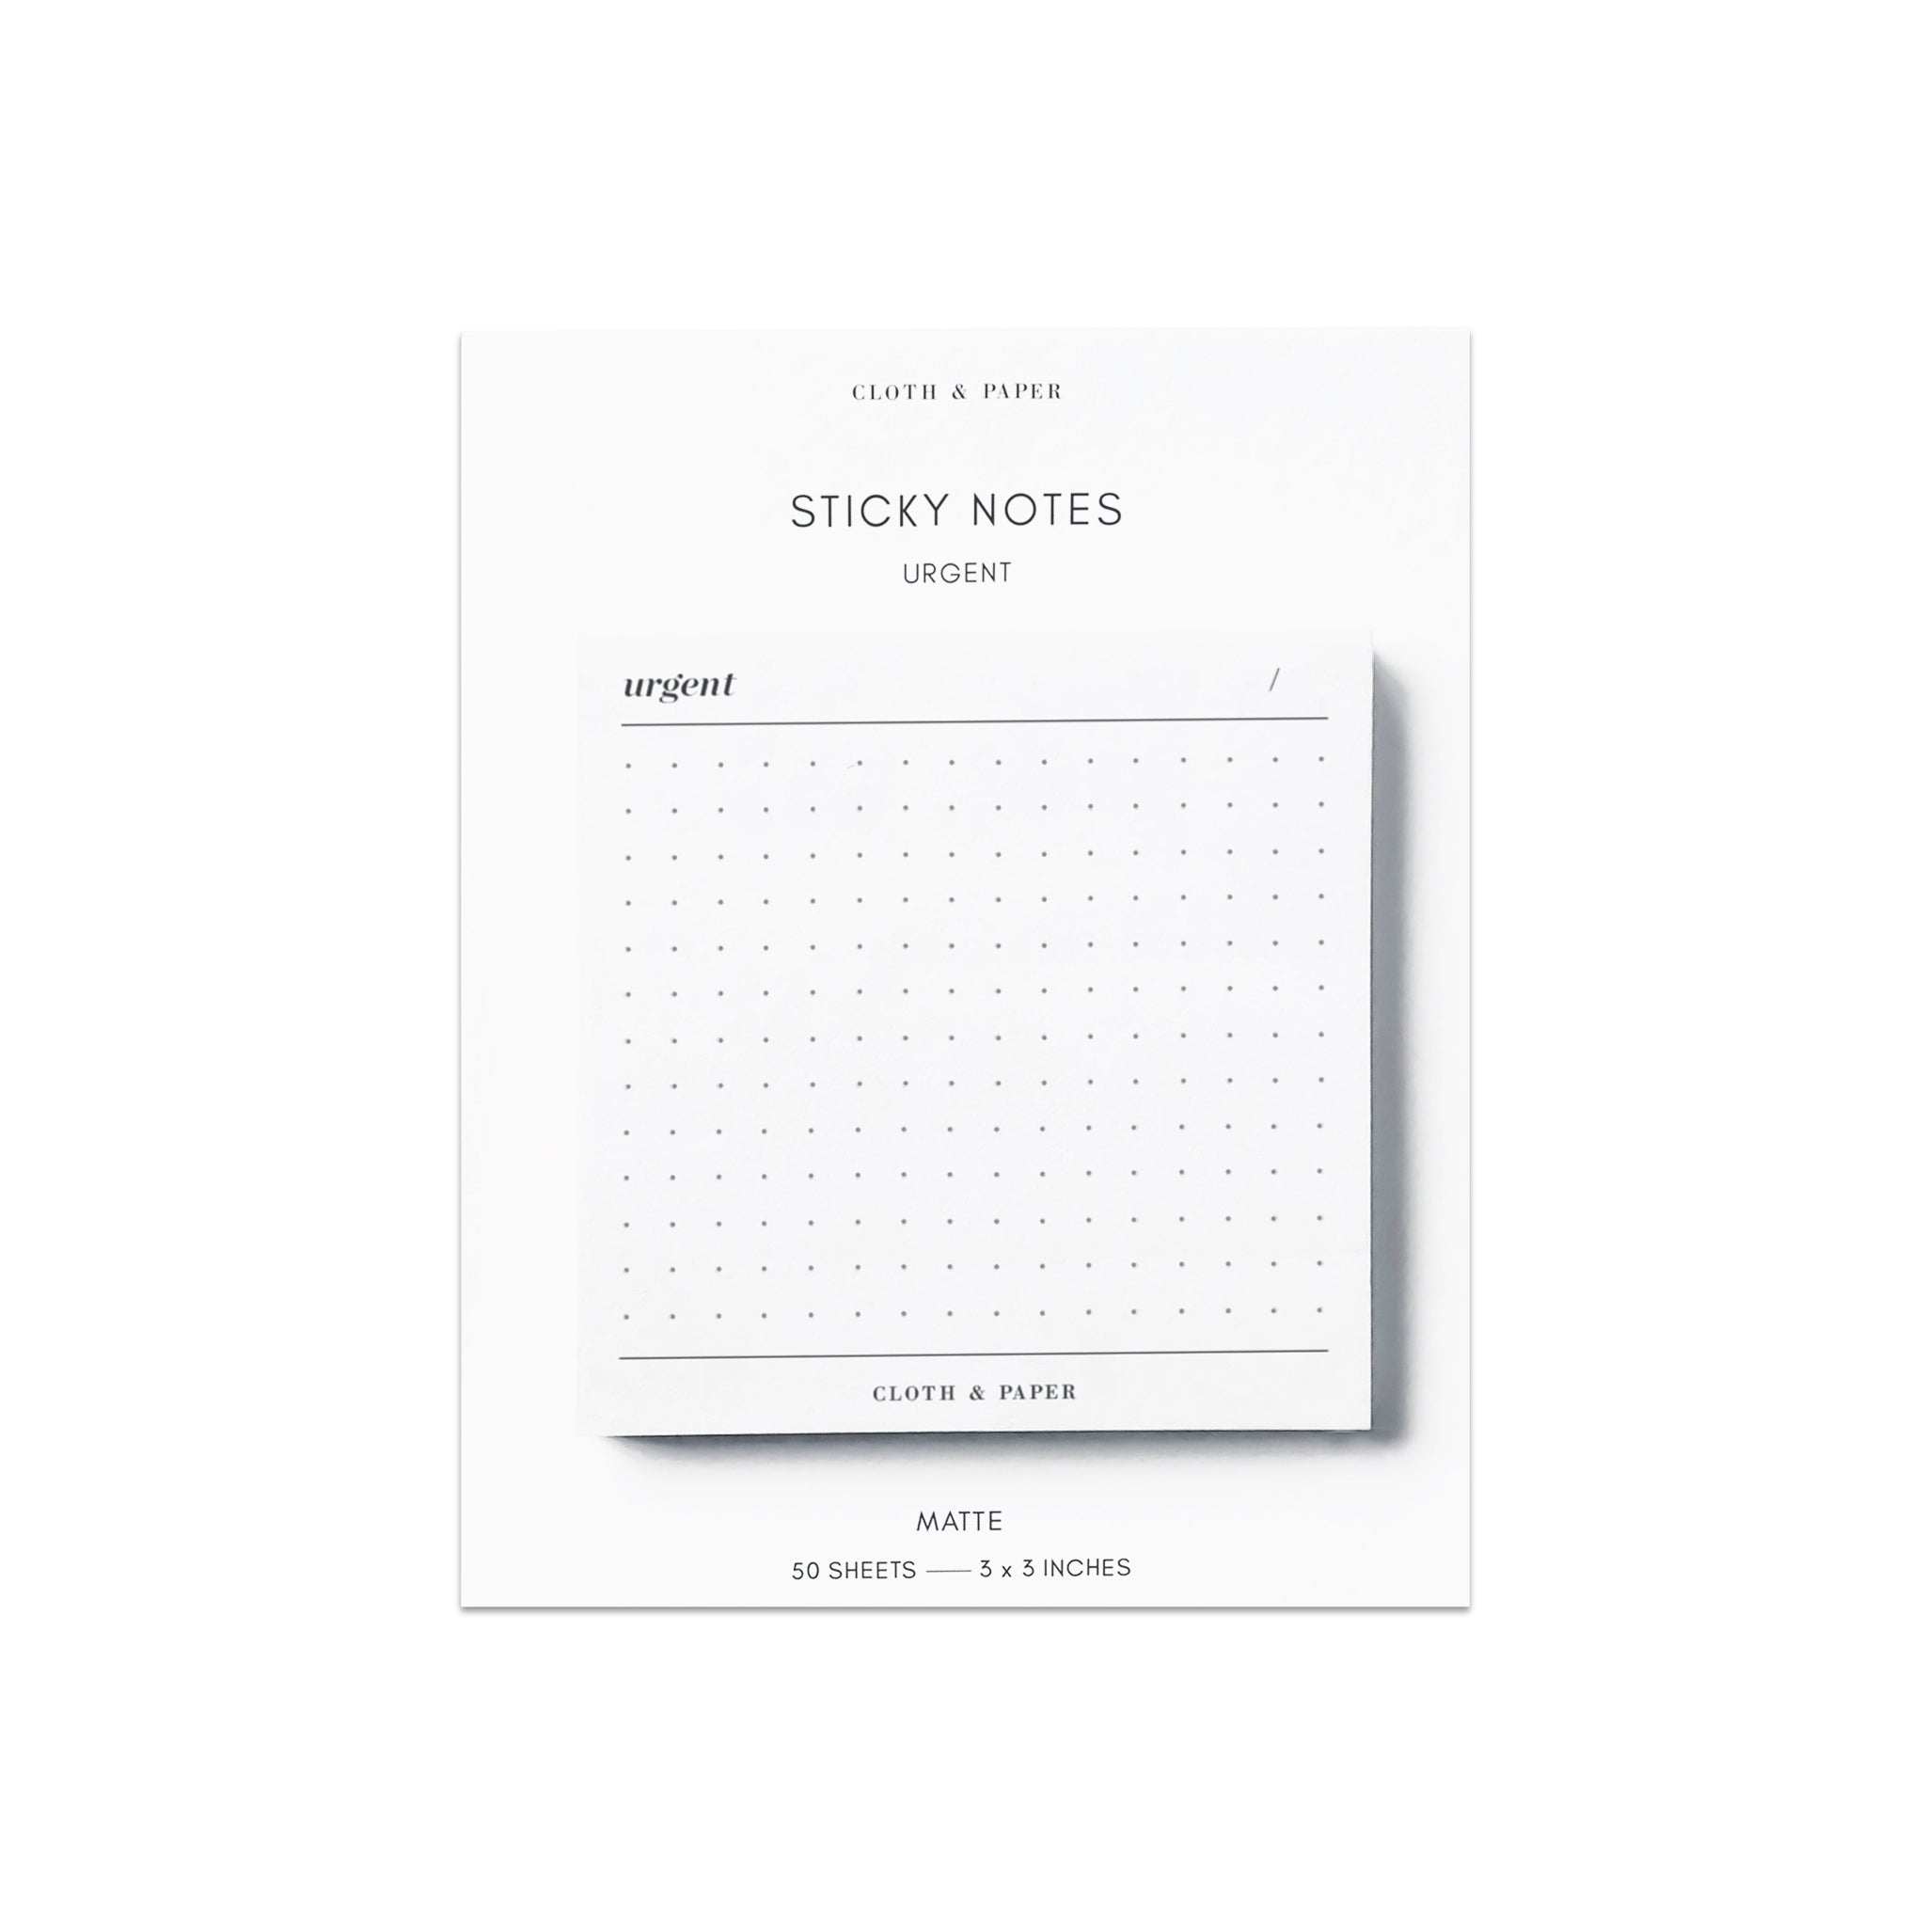 Blank Tab Sticky Note Set  Cloth & Paper – CLOTH & PAPER